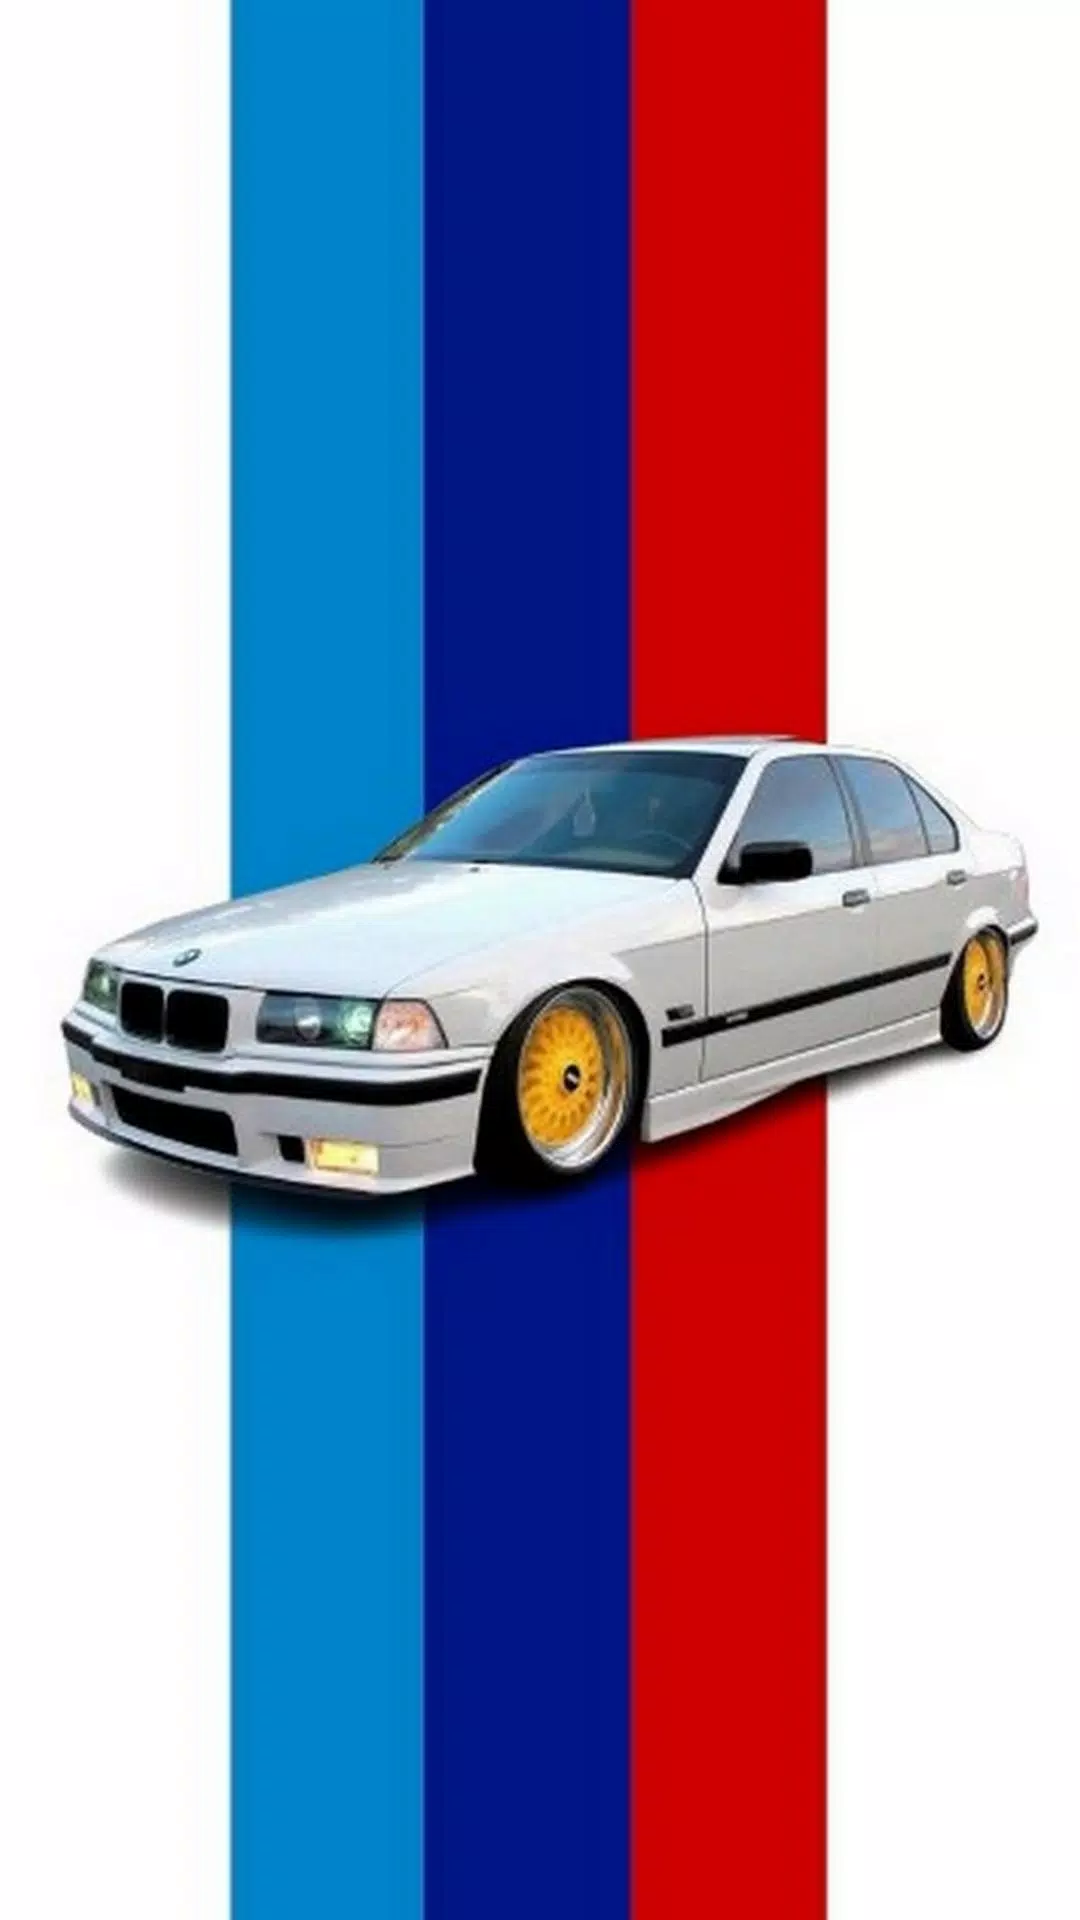 Bmw E36 Wallpapers Apk For Android Download